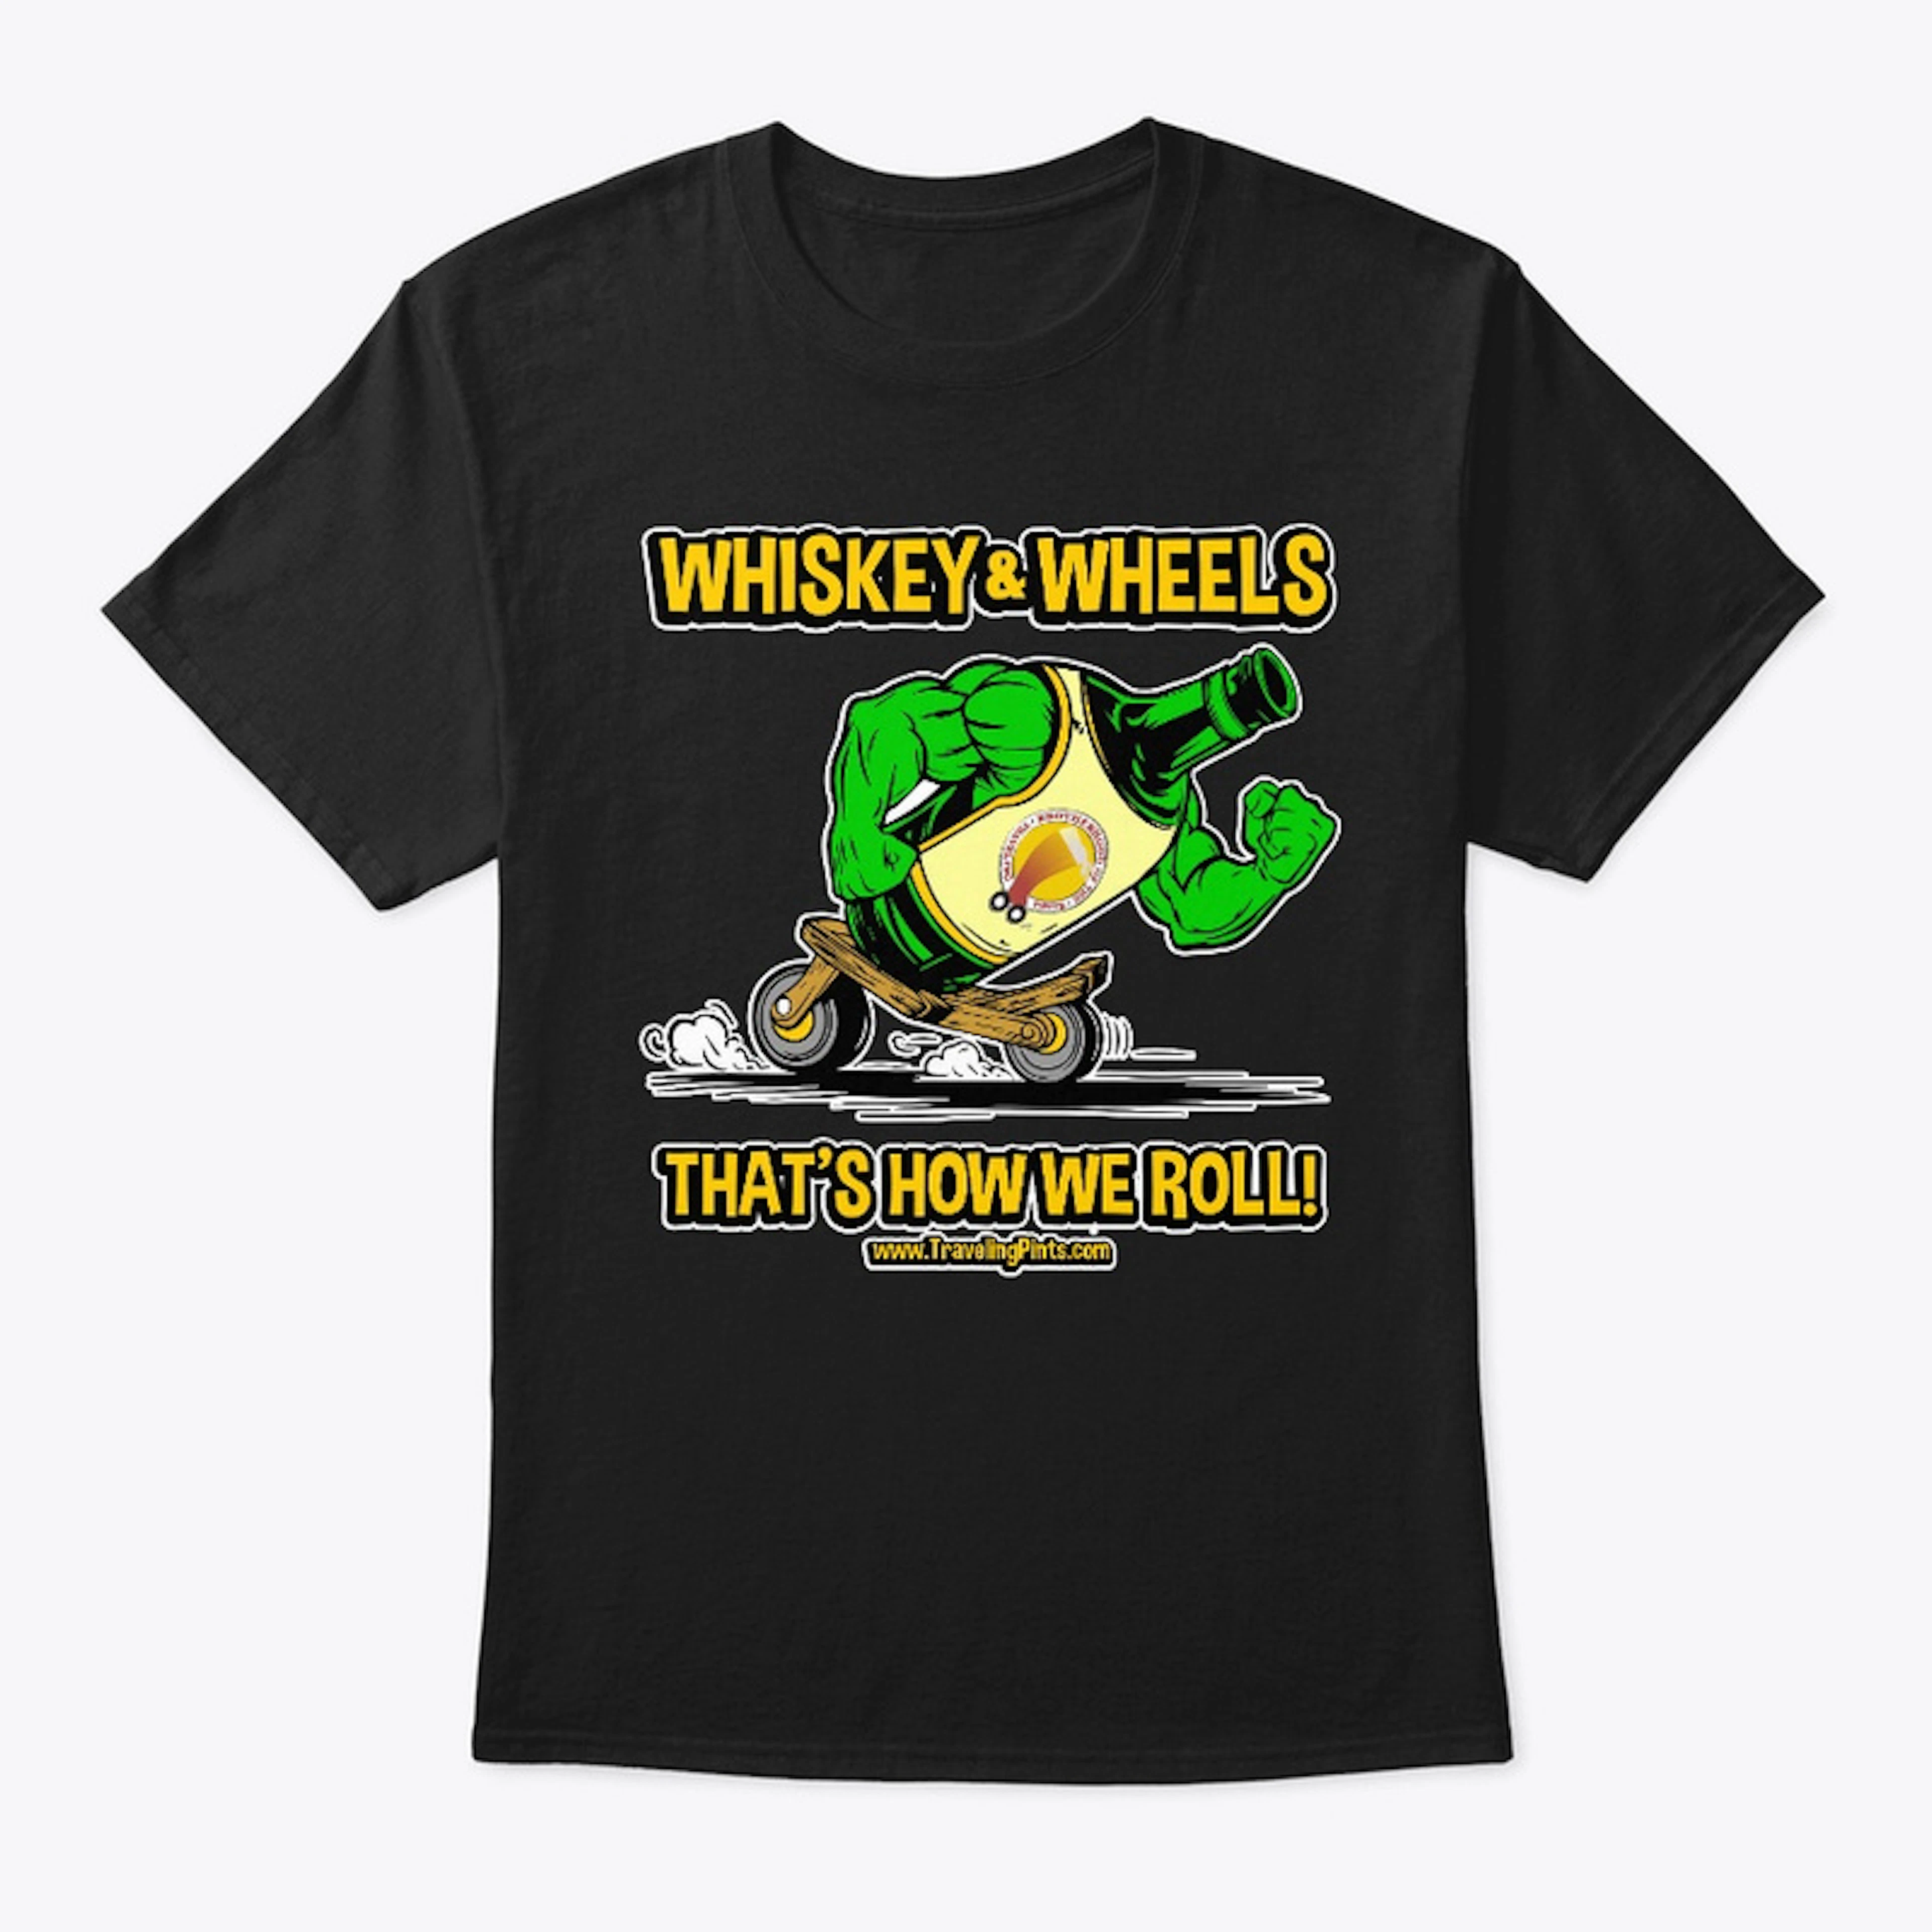 Traveling Pints Whiskey and Wheels